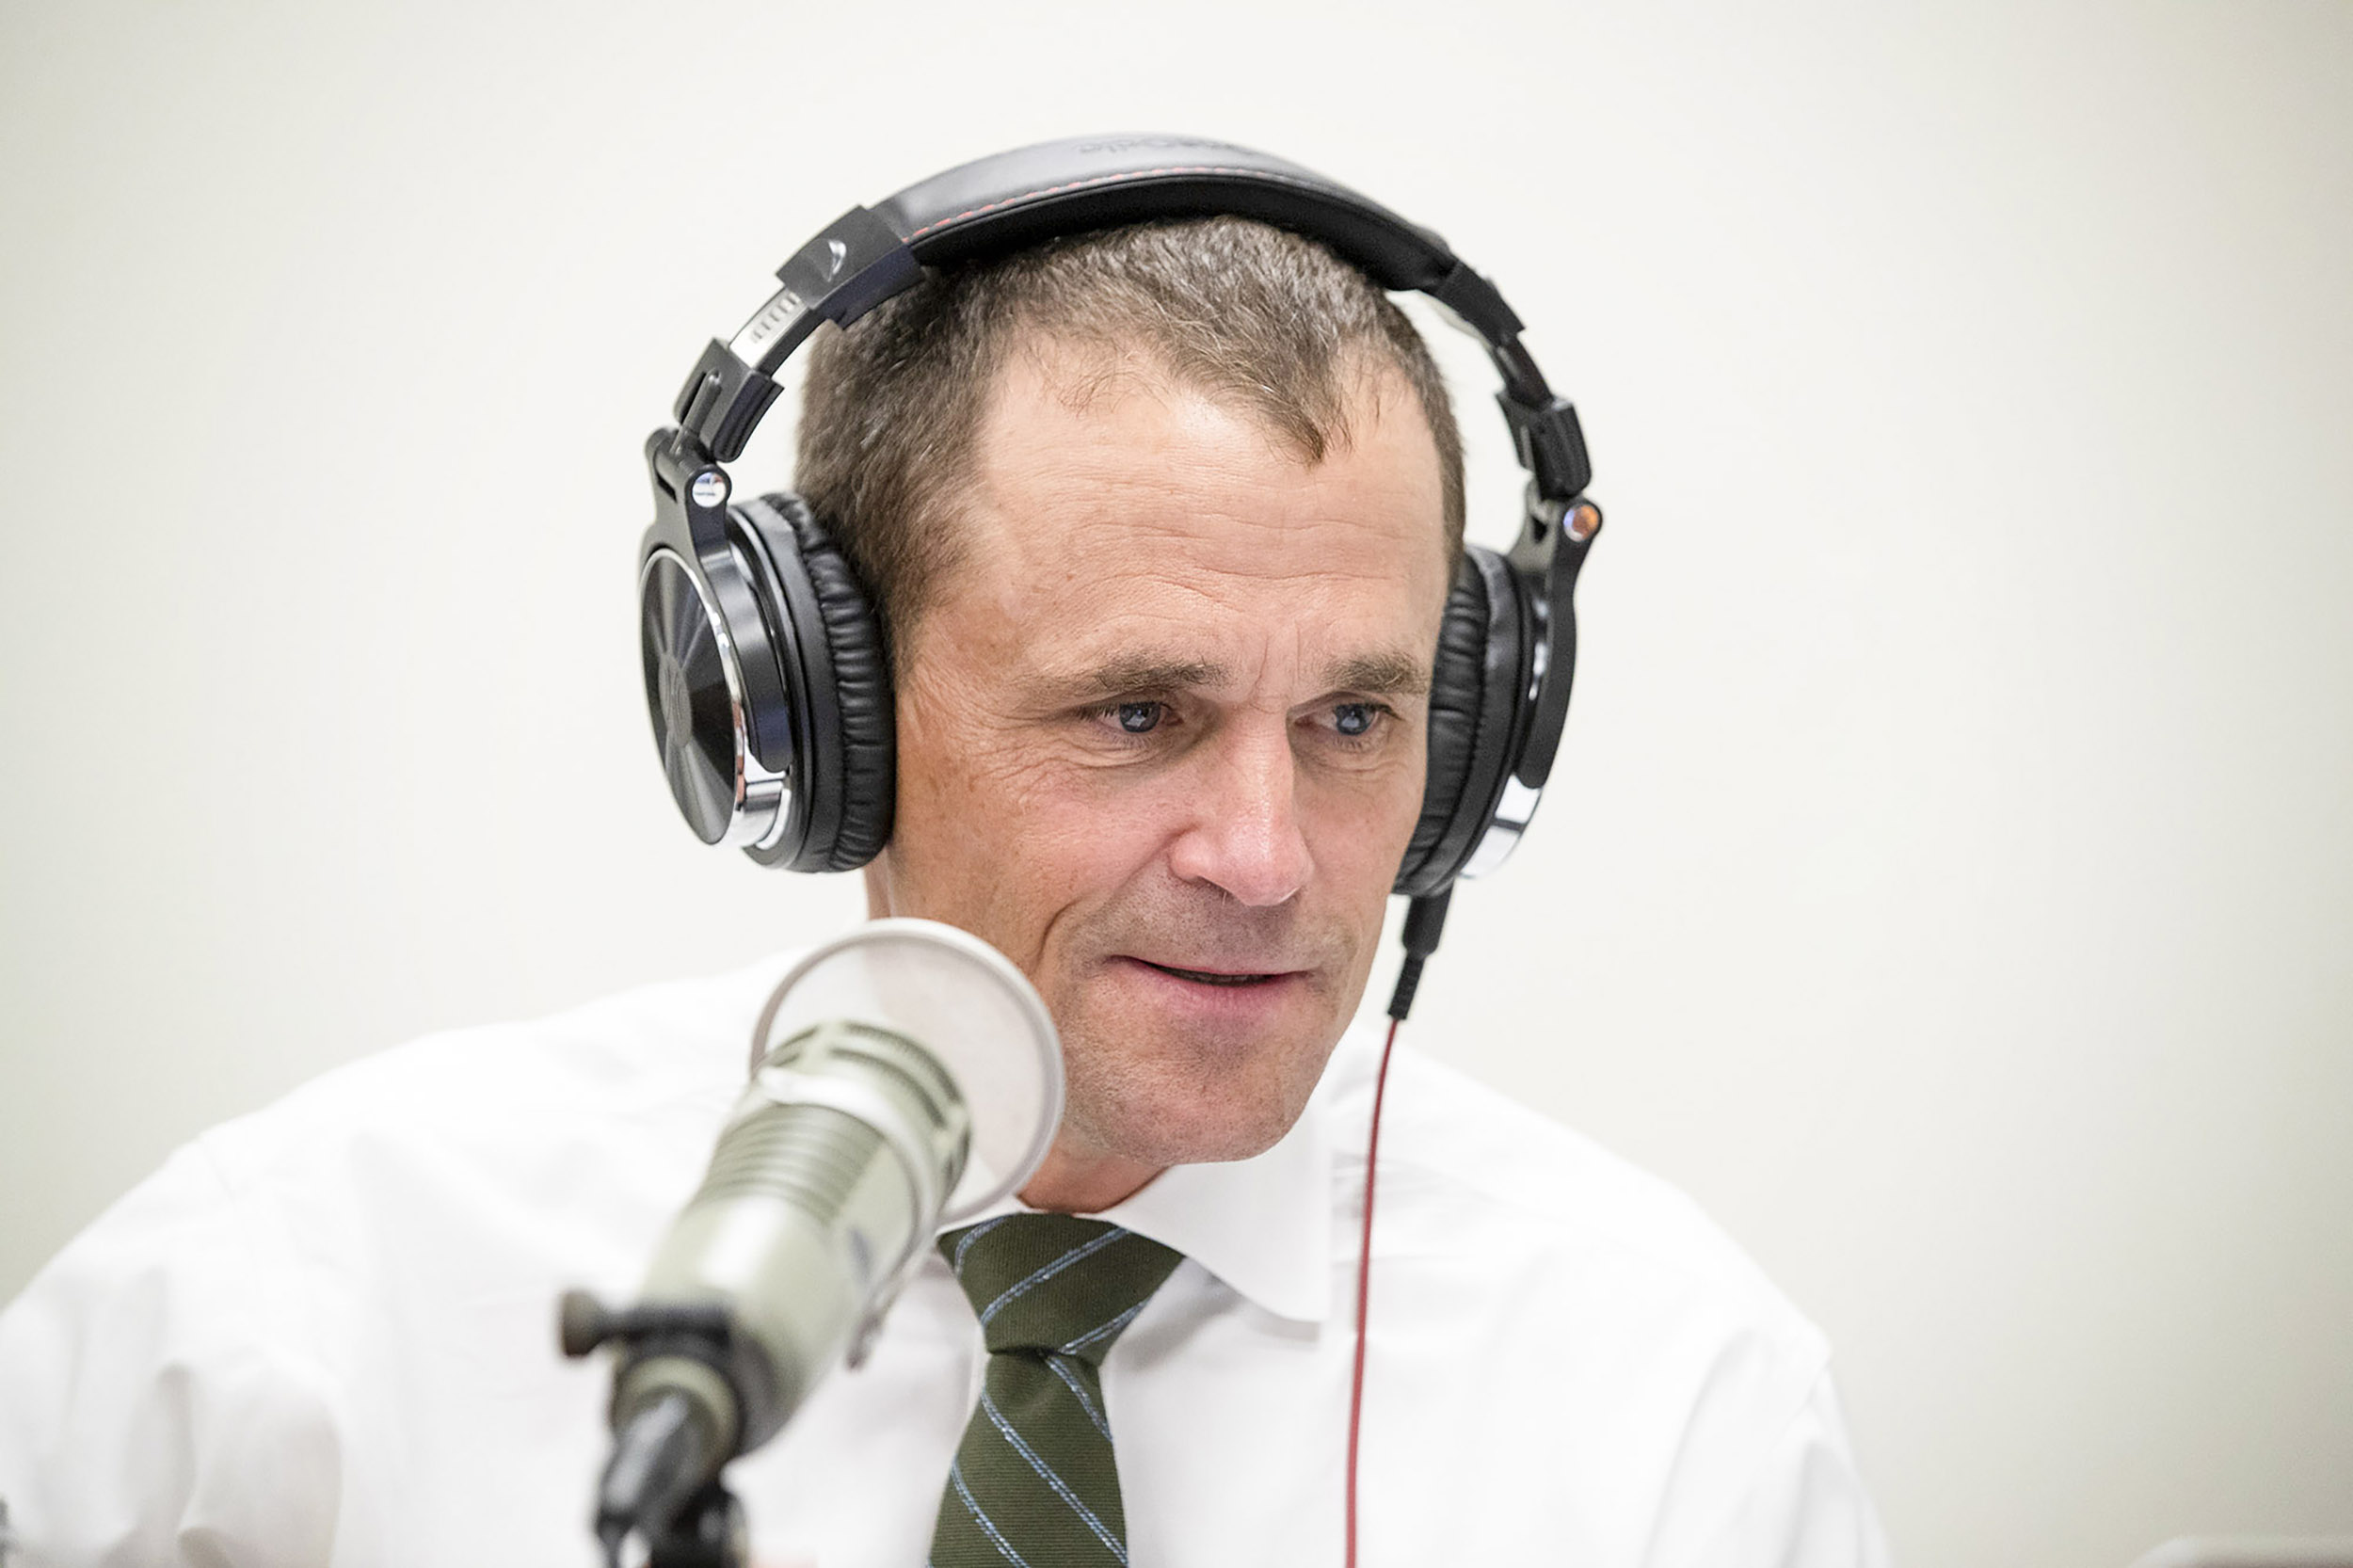 Jim Ryan wears a set of headphones and speaks into a microphone